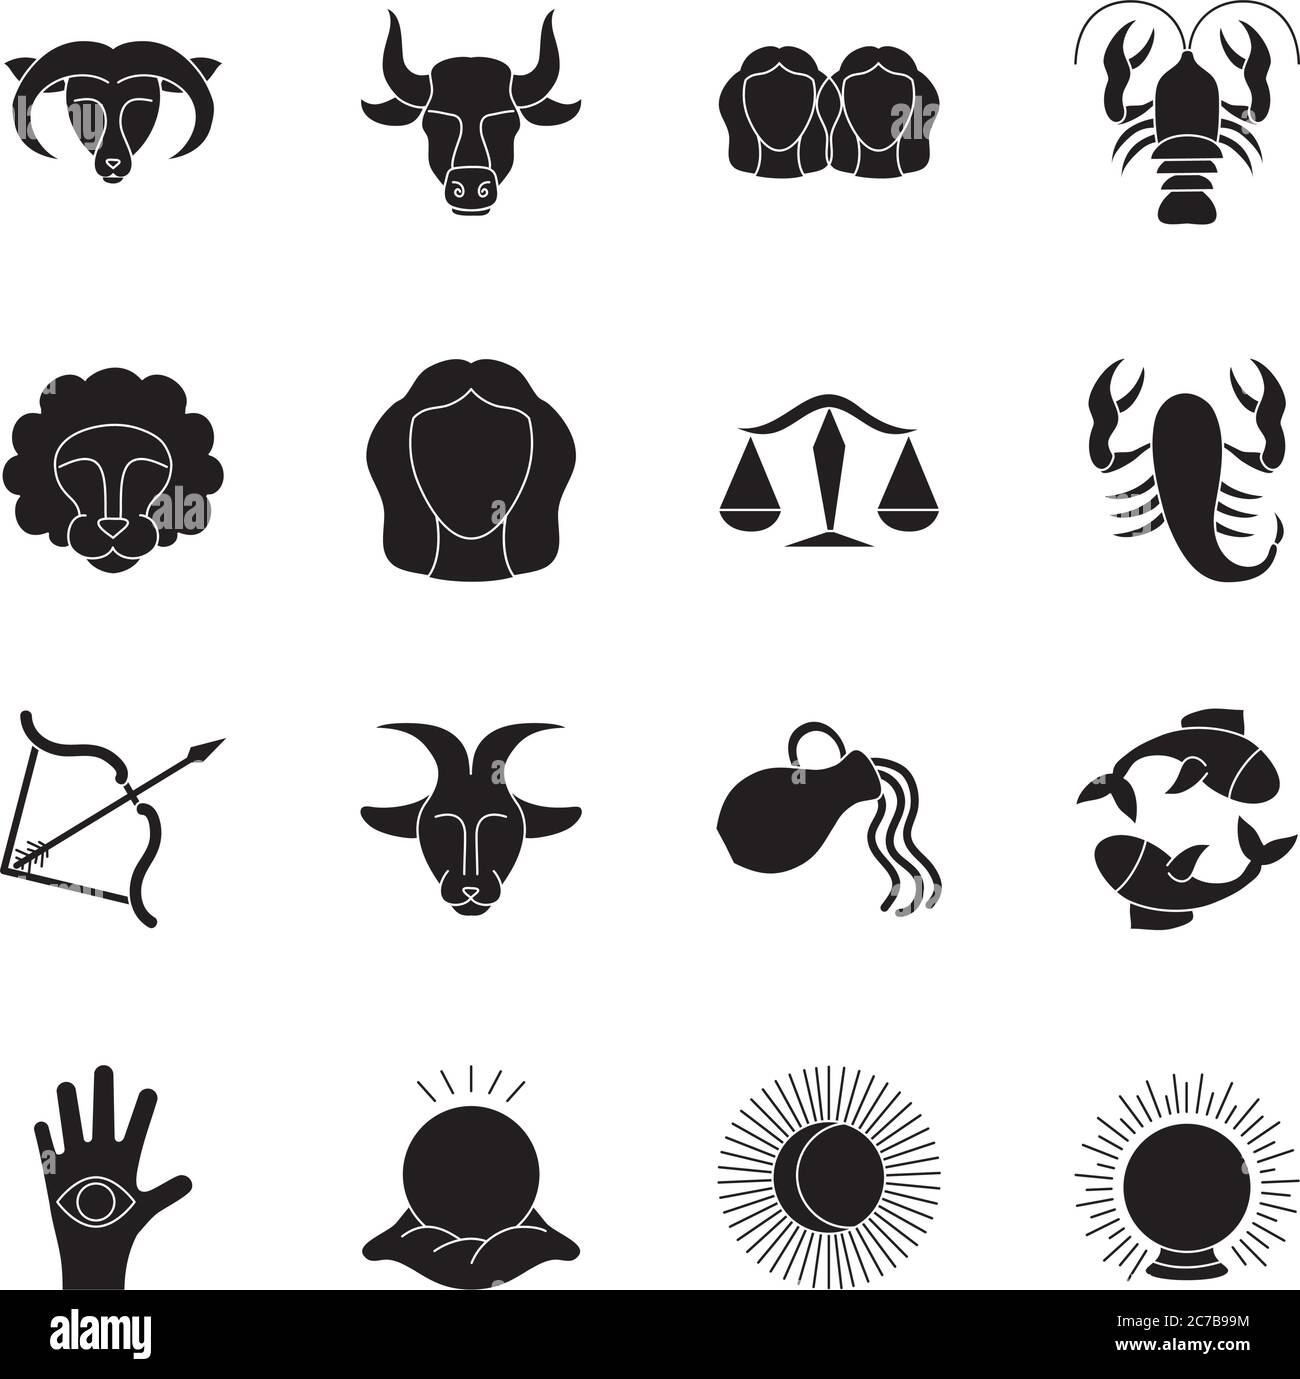 astrology signs icon set over white background, silhouette style, vector illustration Stock Vector